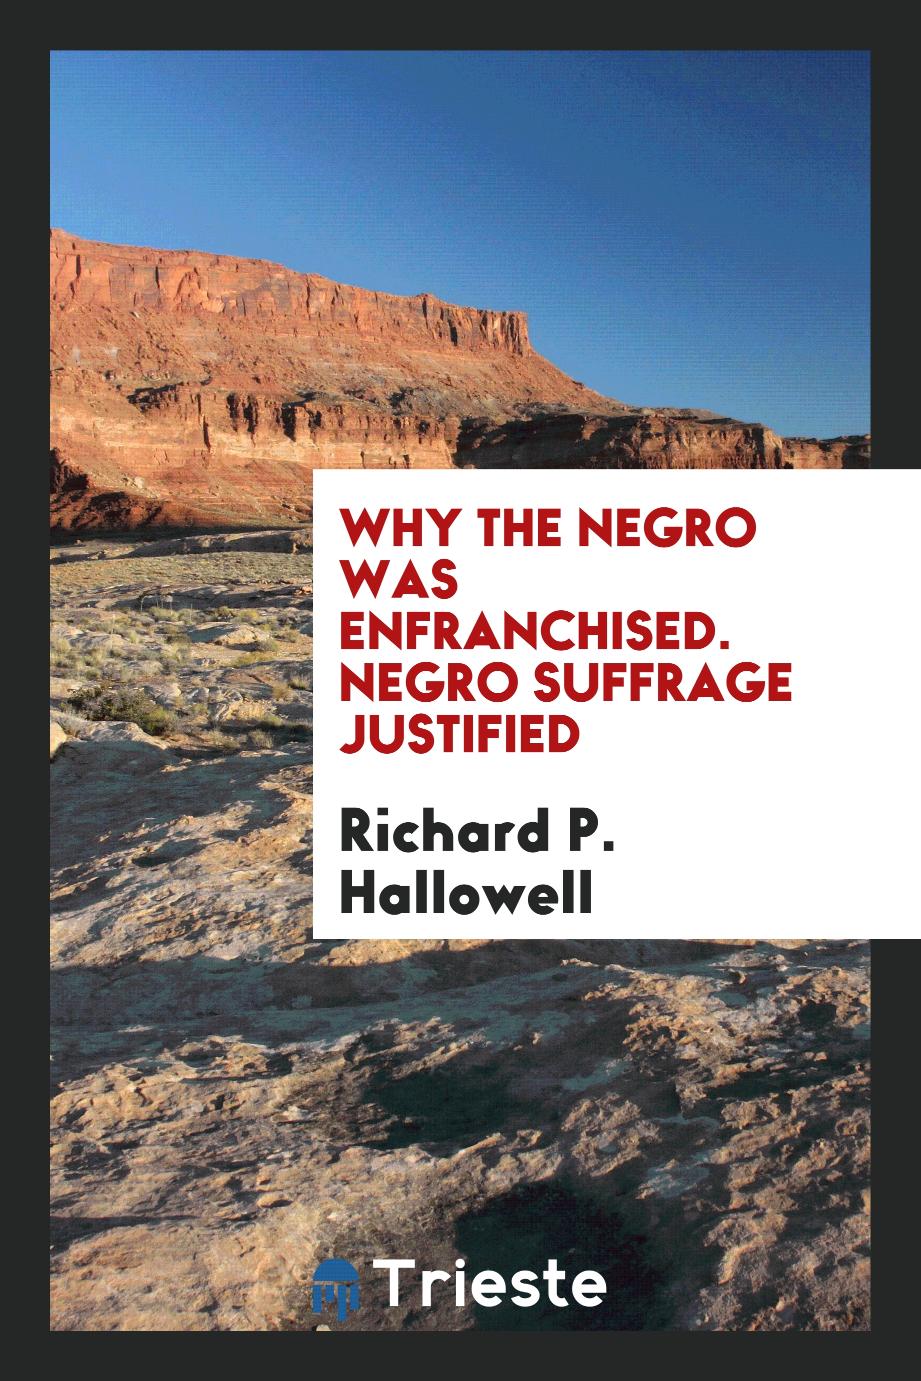 Why the negro was enfranchised. Negro suffrage justified